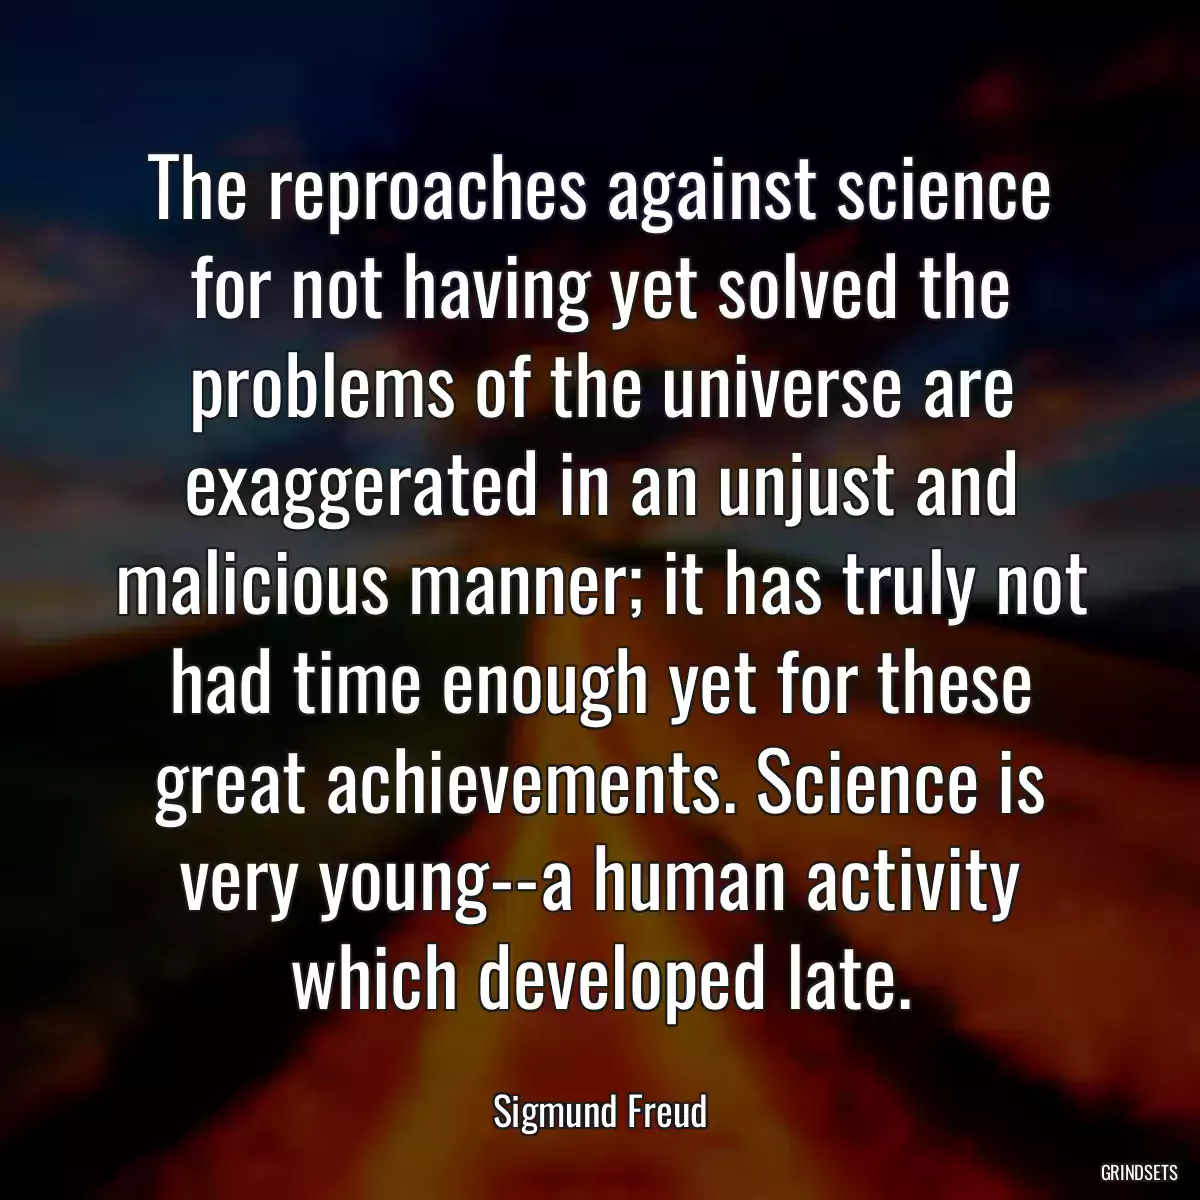 The reproaches against science for not having yet solved the problems of the universe are exaggerated in an unjust and malicious manner; it has truly not had time enough yet for these great achievements. Science is very young--a human activity which developed late.